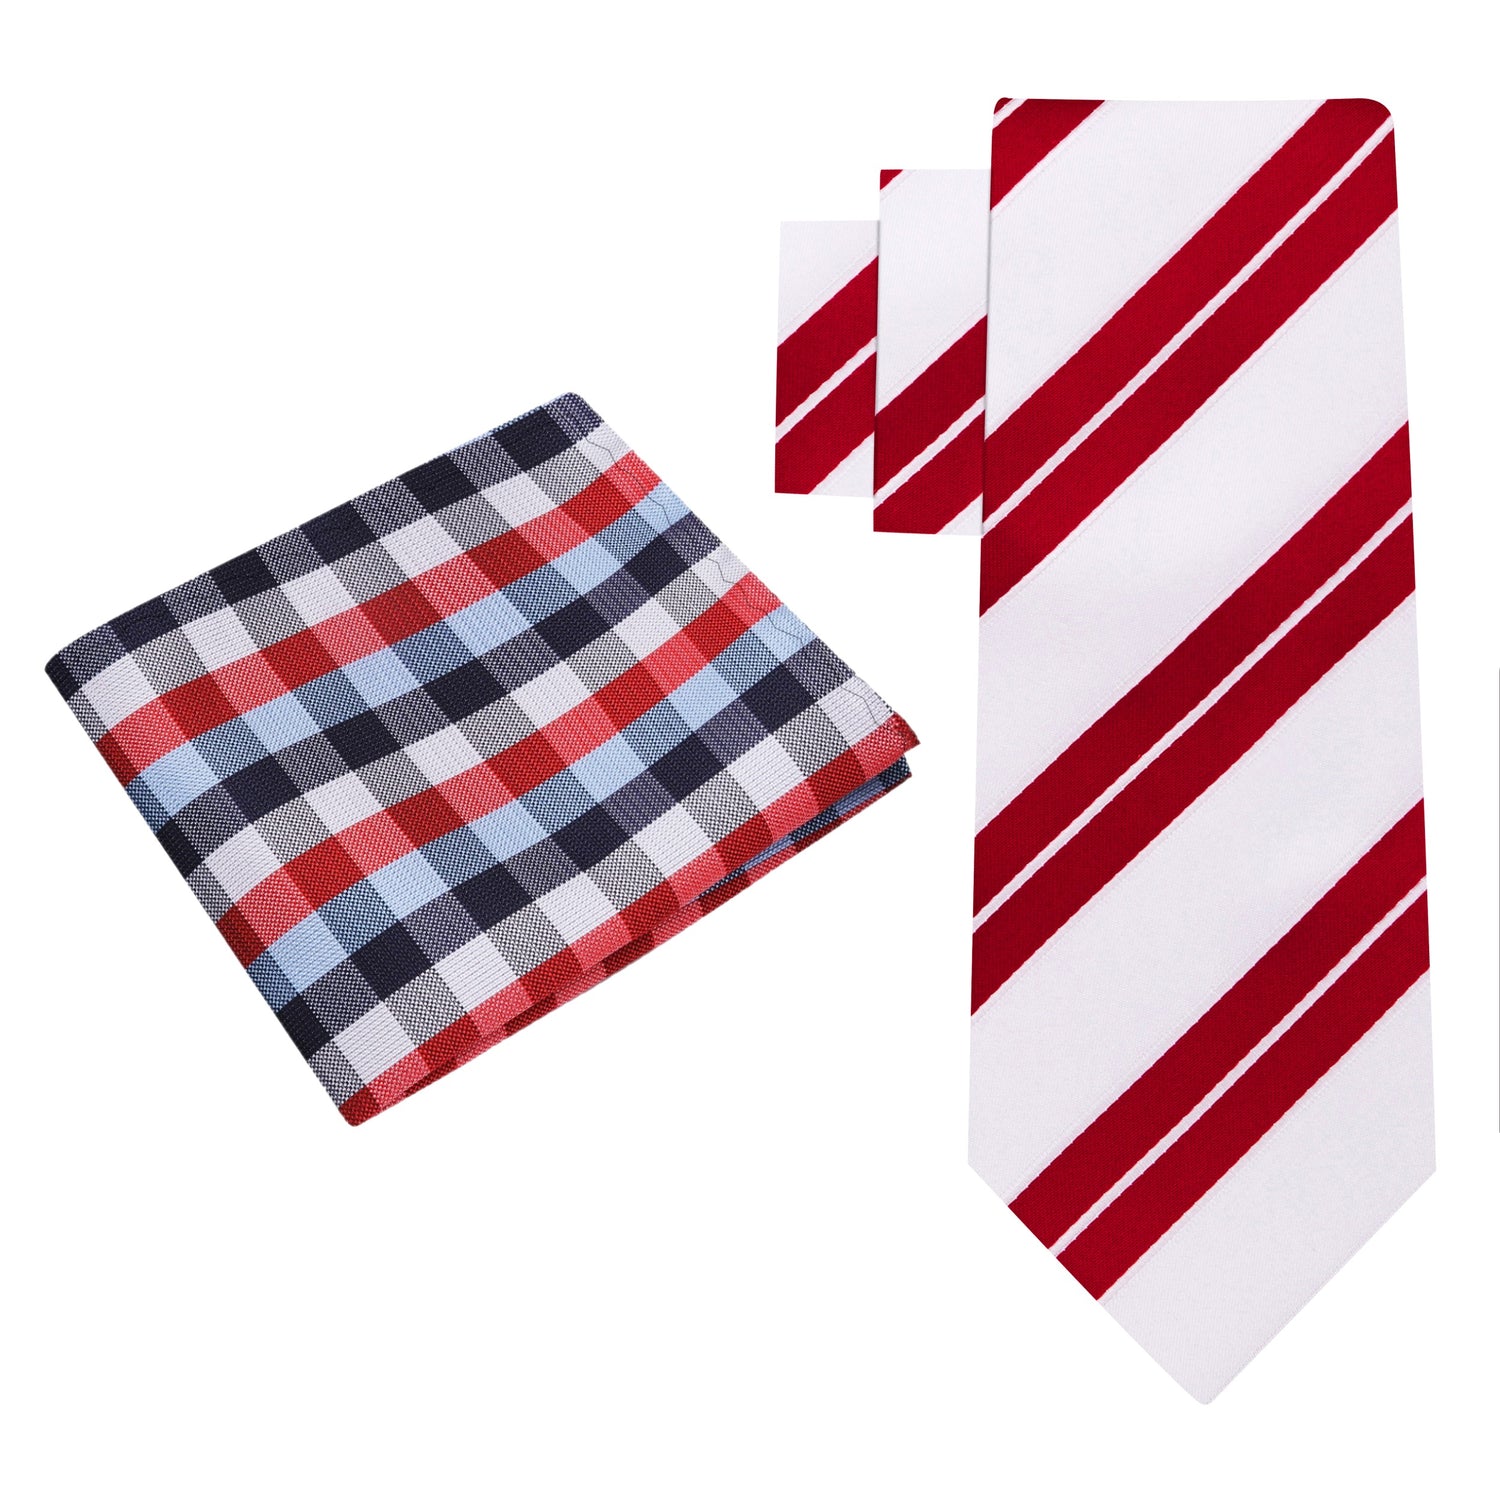 Alt View: White, Red Stripe Necktie and Blue, Red, Check Square